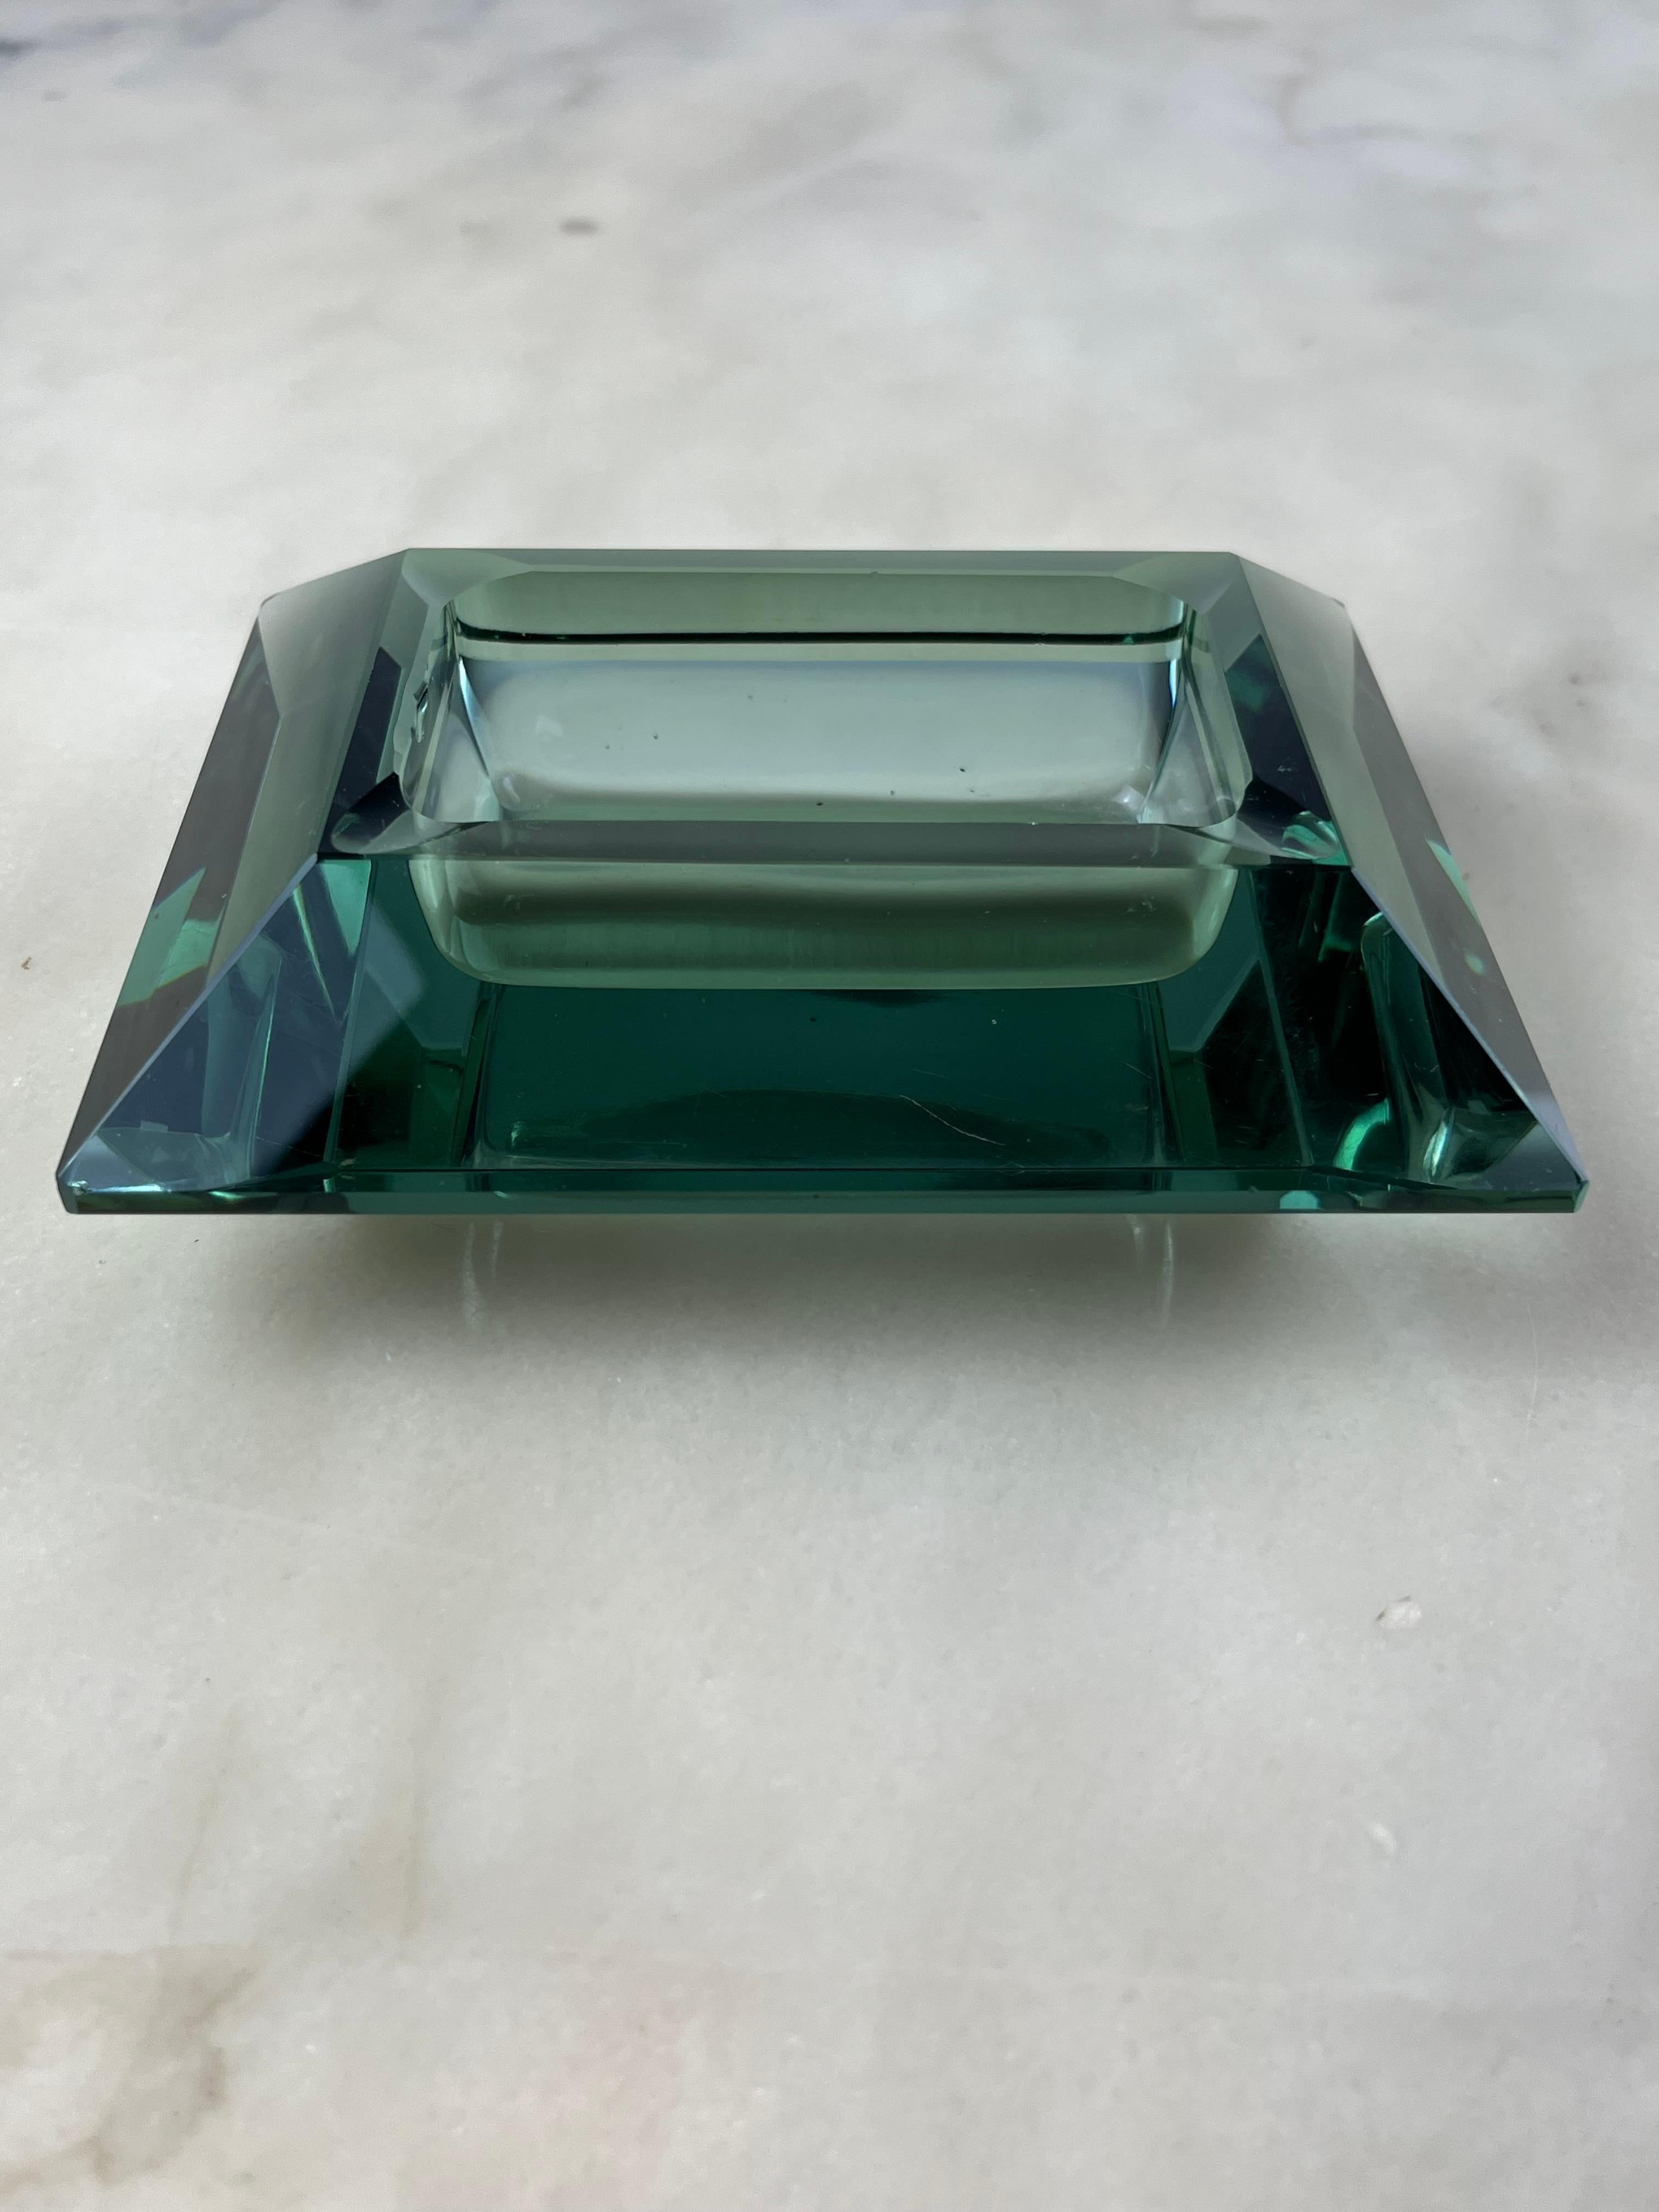 Murano glass ashtray/valet tray, Italy, 1970s
Nile green color, small chips that do not compromise its beauty. Family object.